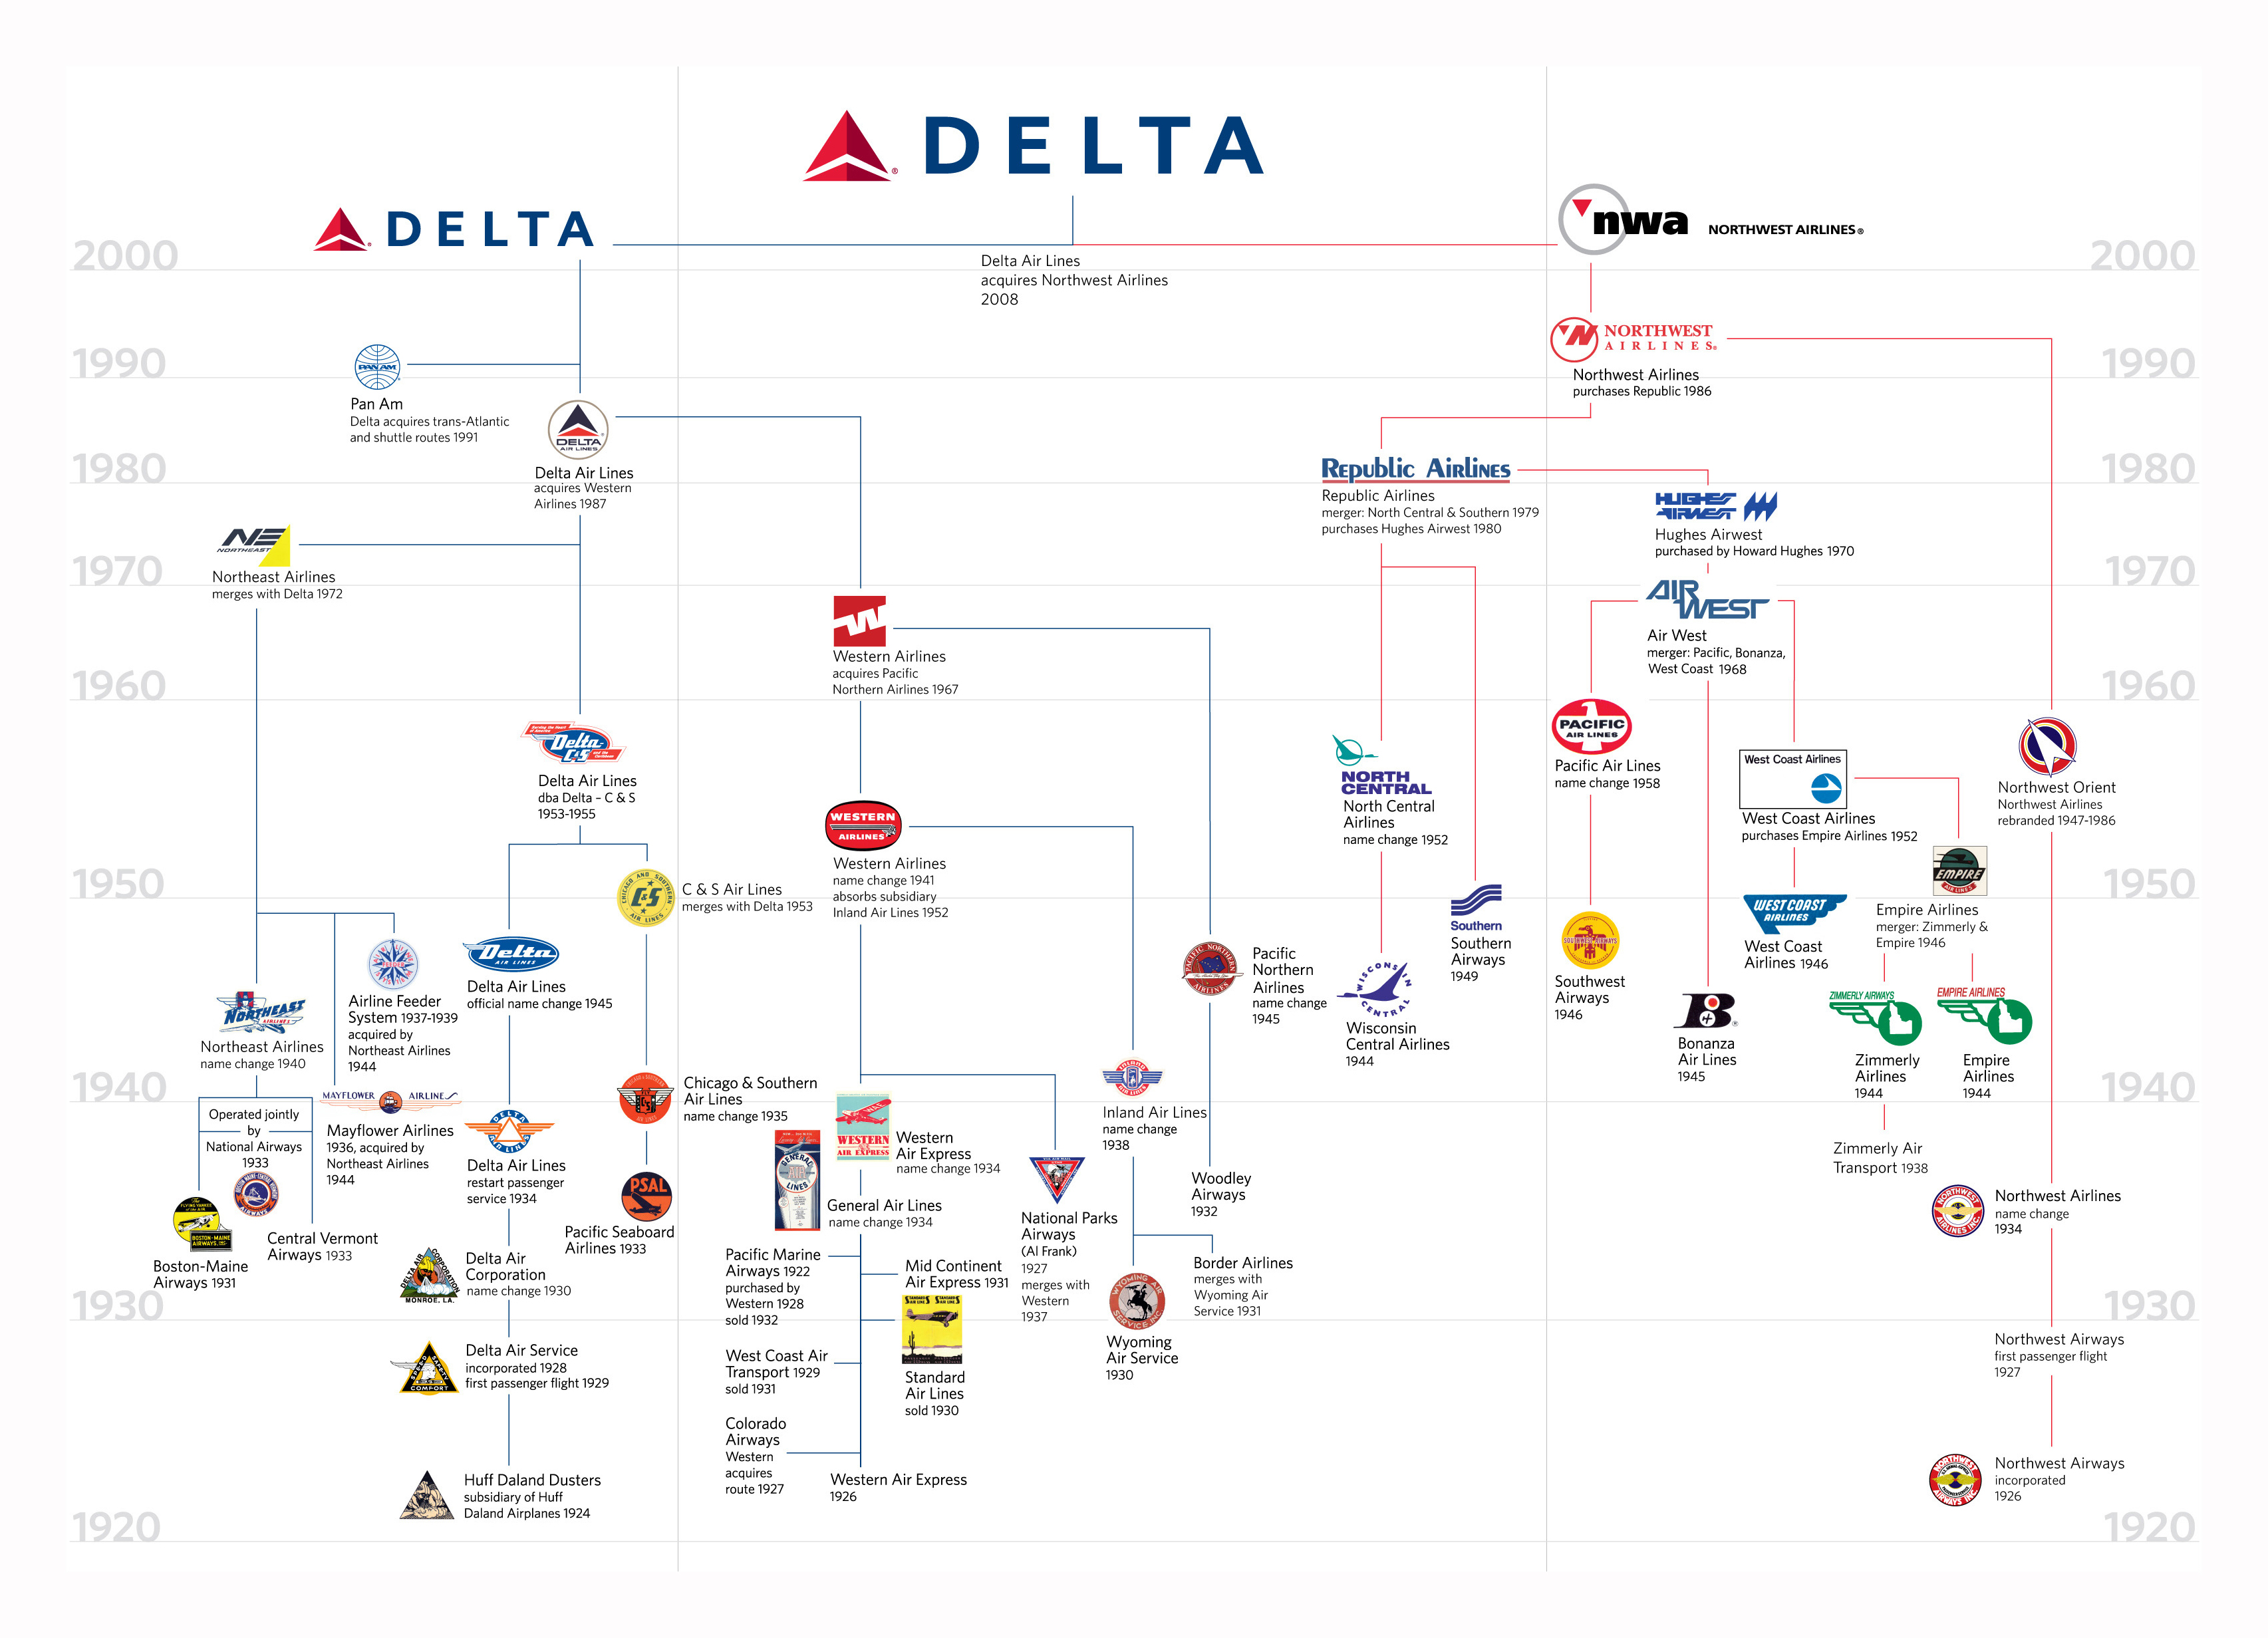 Where can you find the telephone number for Delta Airlines?